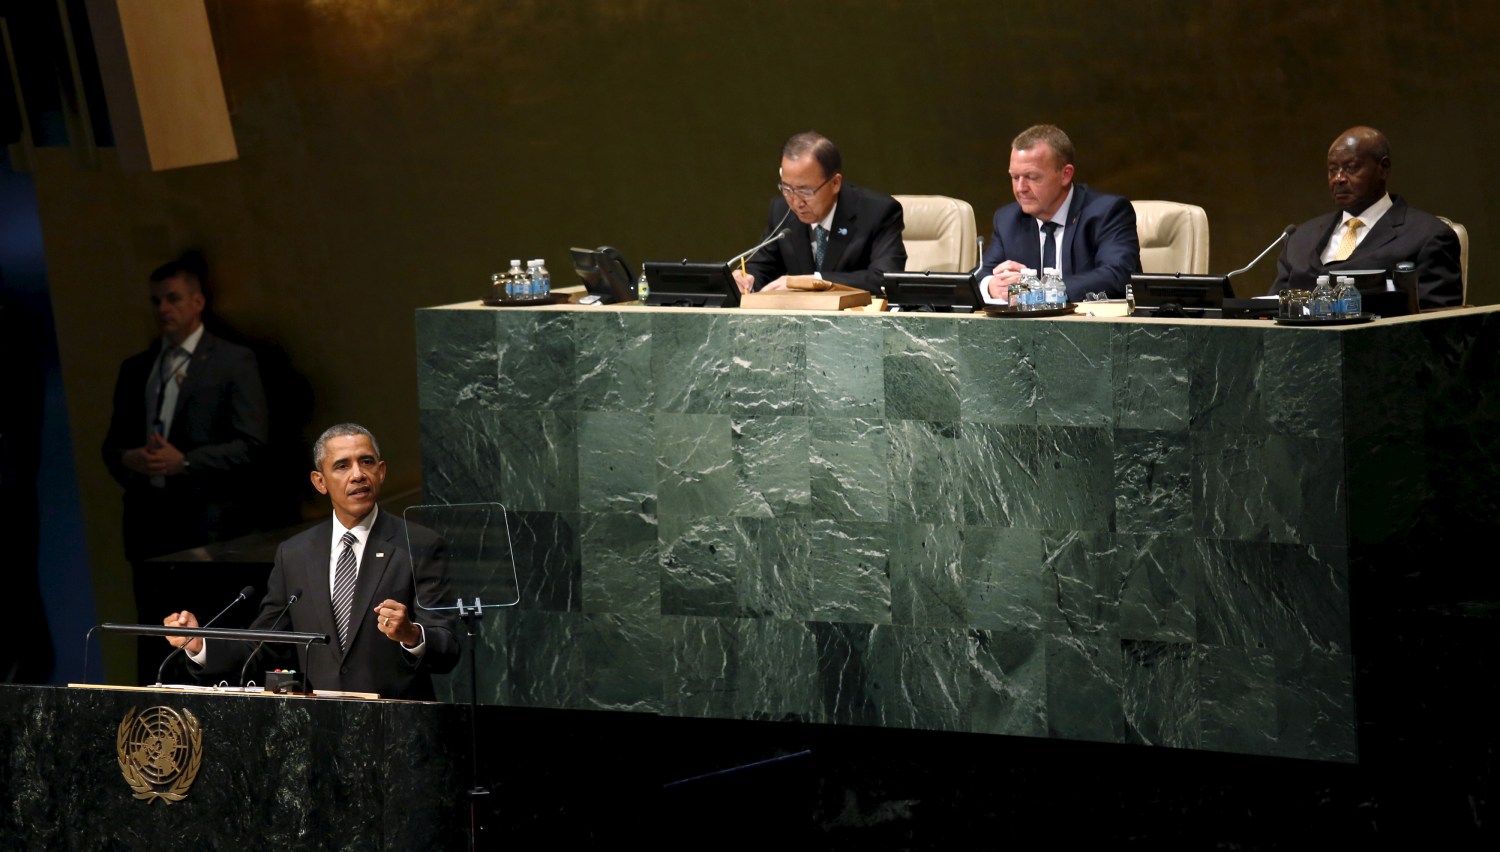 U.S. President Barack Obama addresses the U.N. Closing Session on the post-2015 development agenda at the United Nations General Assembly September 27, 2015. REUTERS/Kevin Lamarque